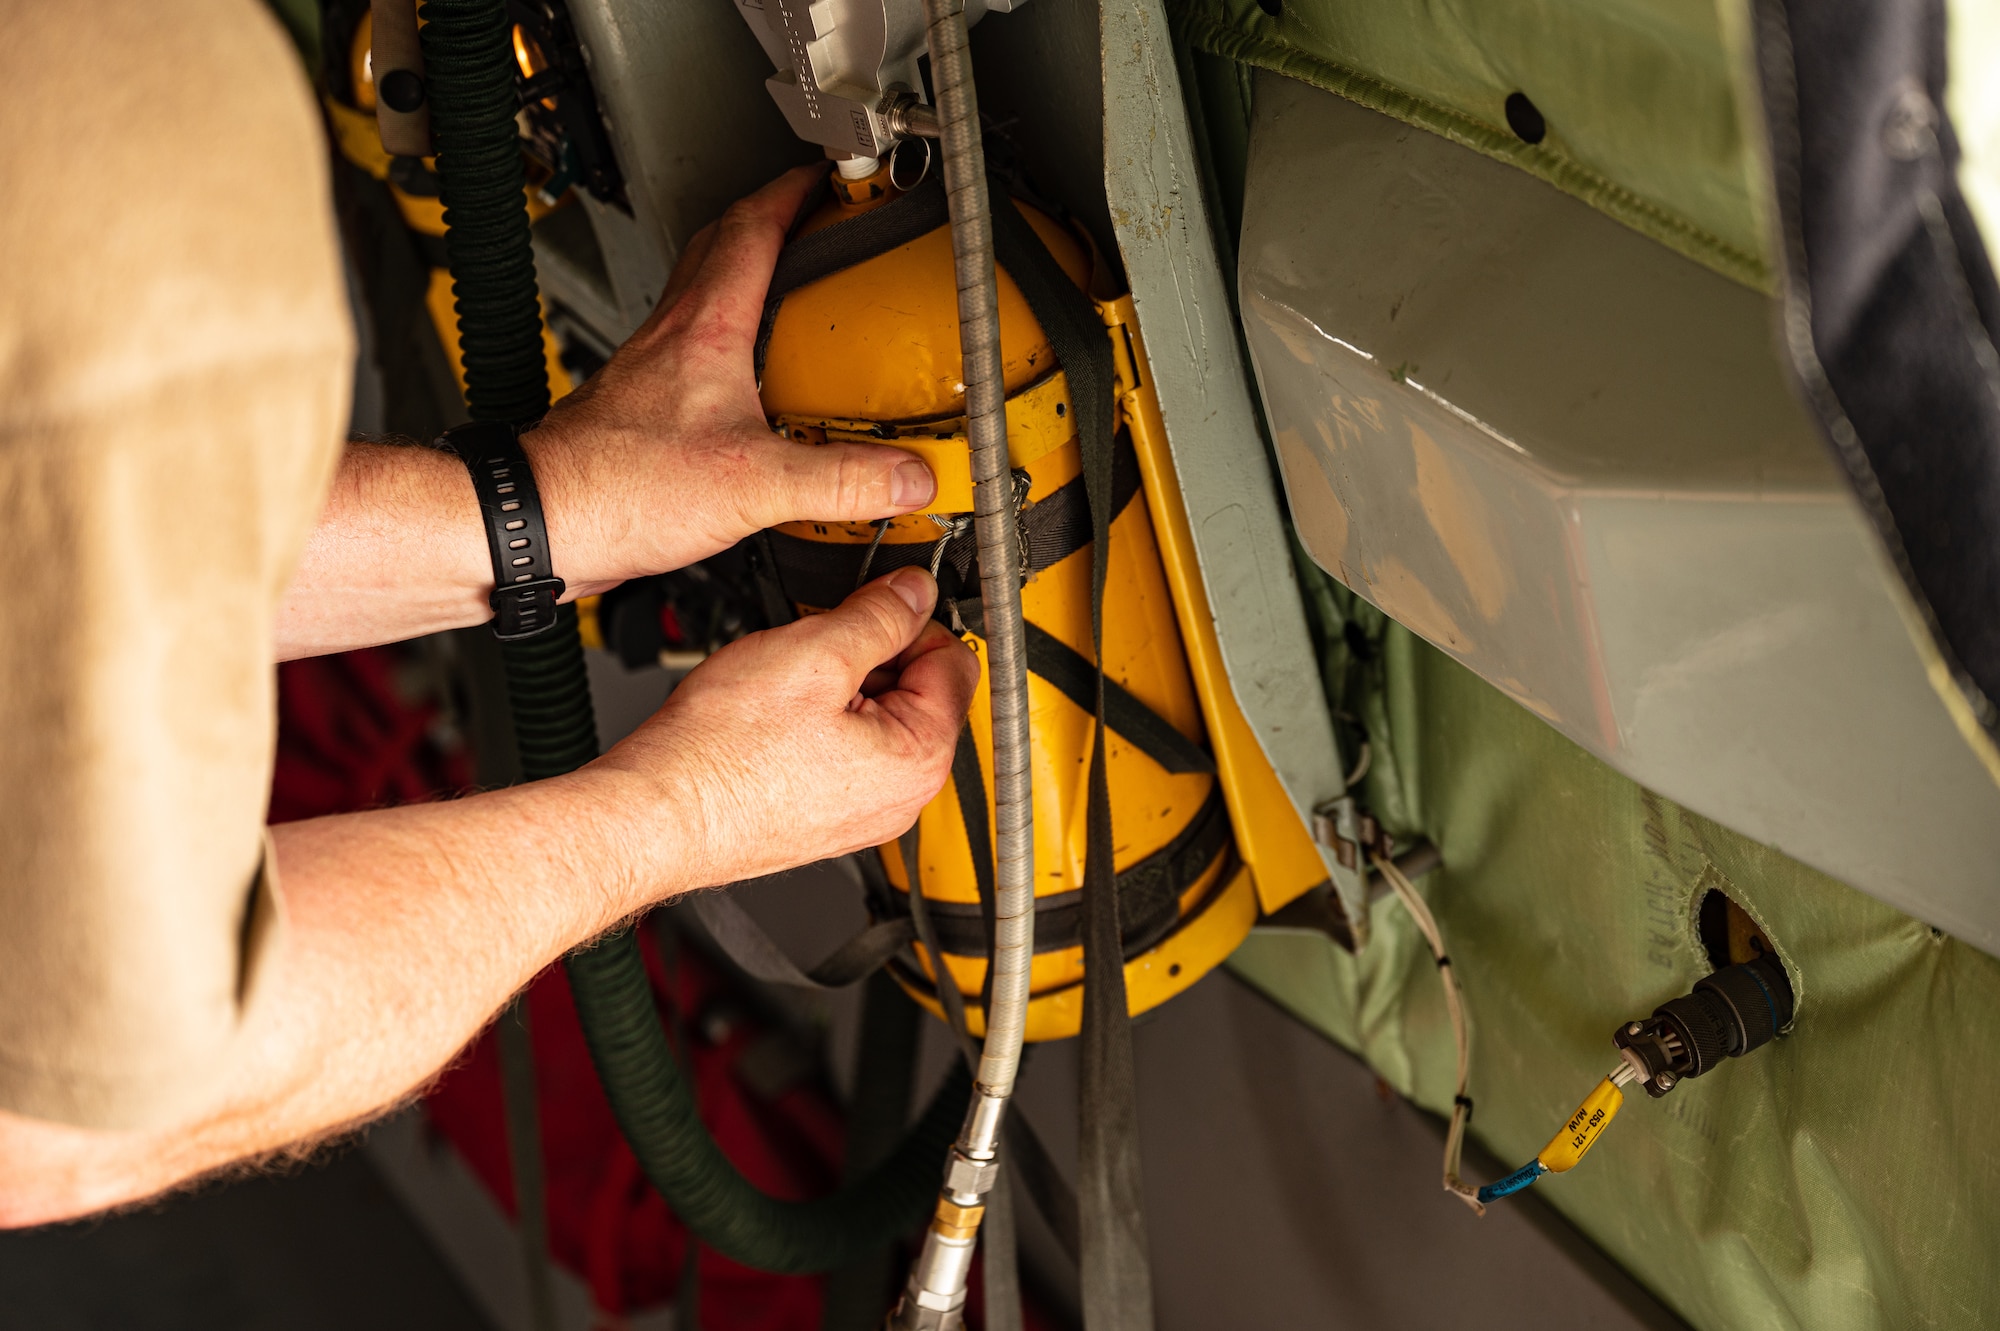 U.S. Air Force Col. Randy D. Schwinler, Commander 379th Expeditionary Maintenance Group, Al Udeid Air Base, Qatar, reattaches a canister, used for fire suppression, back to the wall of a KC-135 Stratotanker, July 9, 2022. Schwinler conducted a pre-flight check to ensure safety of the aircraft prior to it being used for a flight. (U.S. Air Force photo by Staff Sgt. Dana Tourtellotte)